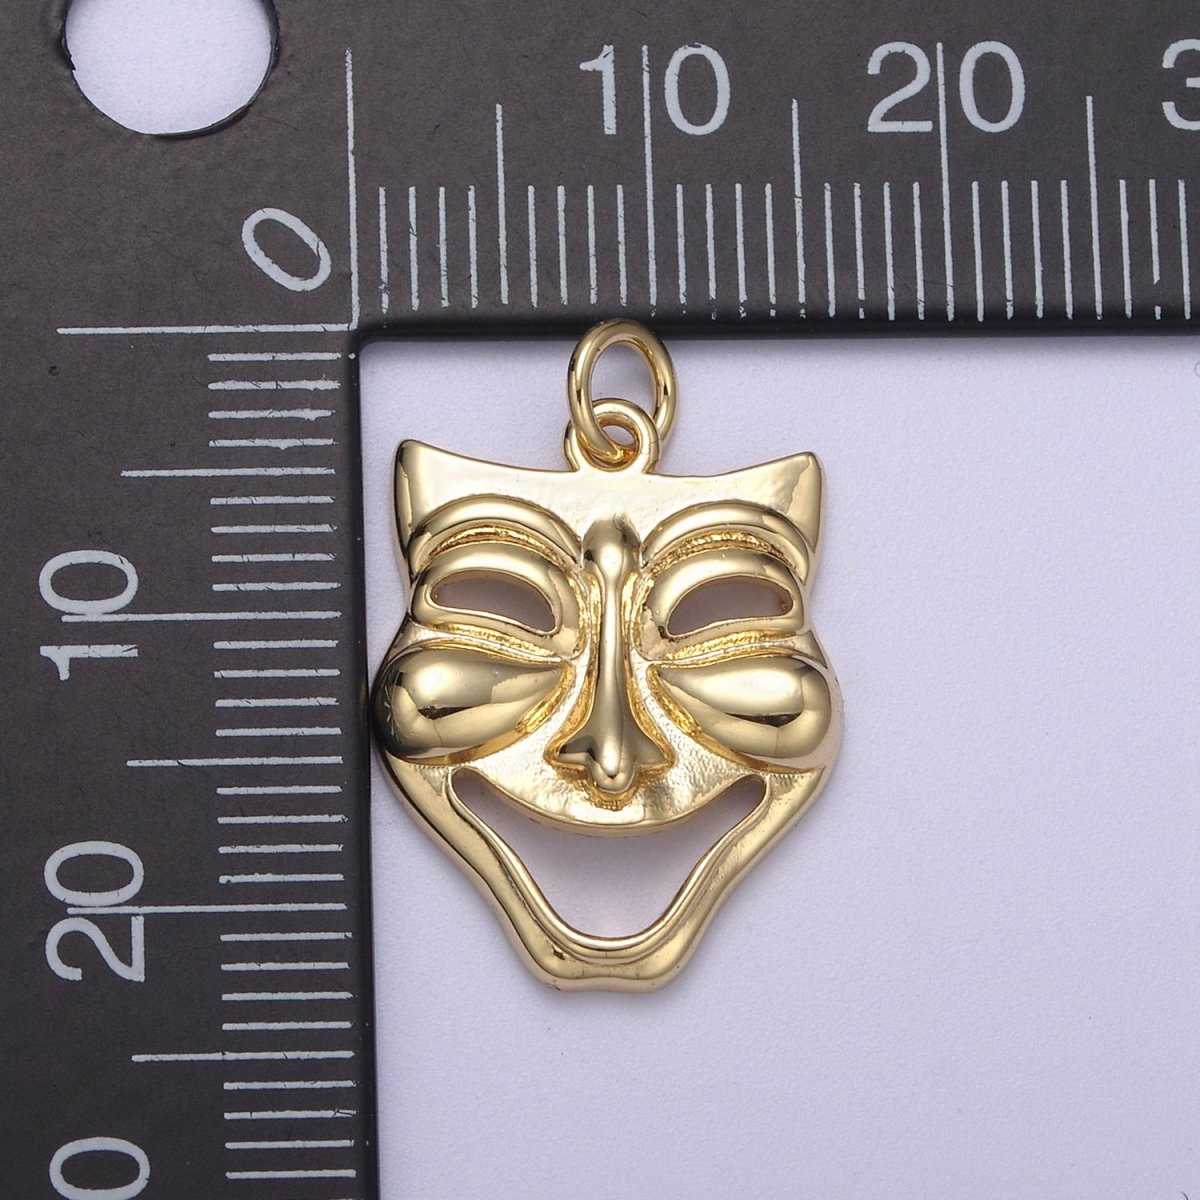 Dainty Gold Theater Mask Charm Drama Play Art Comedy Charm Cameo Inspired Gift C-344 - DLUXCA